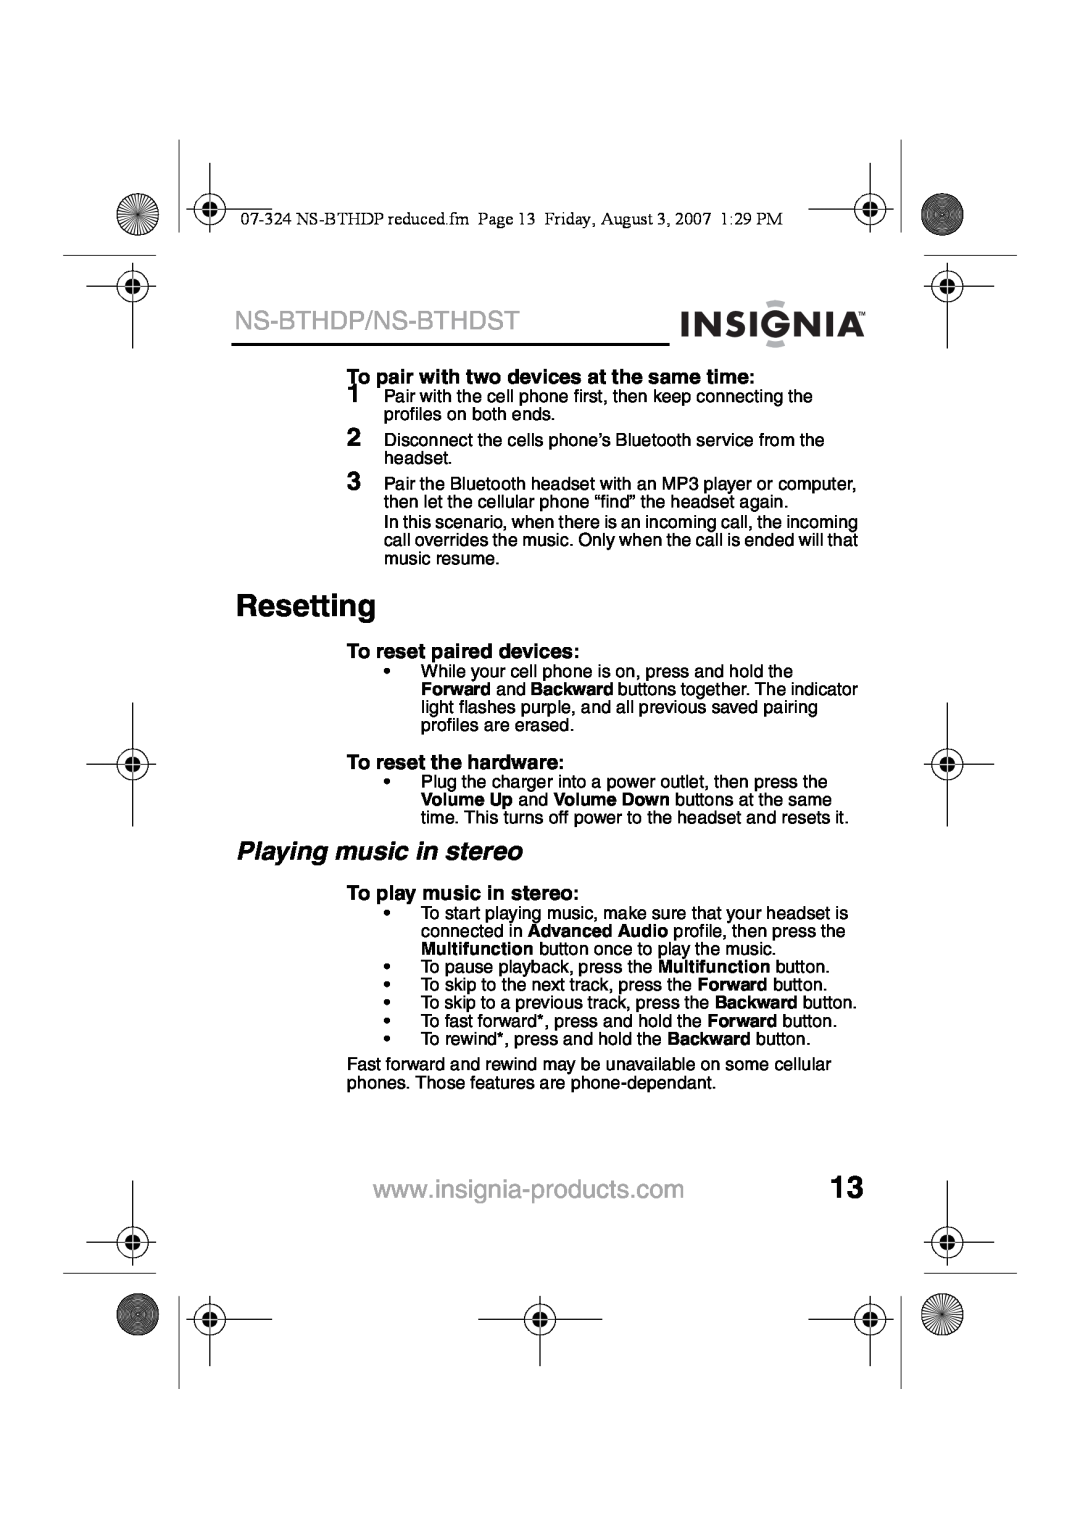 Insignia NS-BTHDST manual Resetting, Playing music in stereo, Ns-Bthdp/Ns-Bthdst, To pair with two devices at the same time 